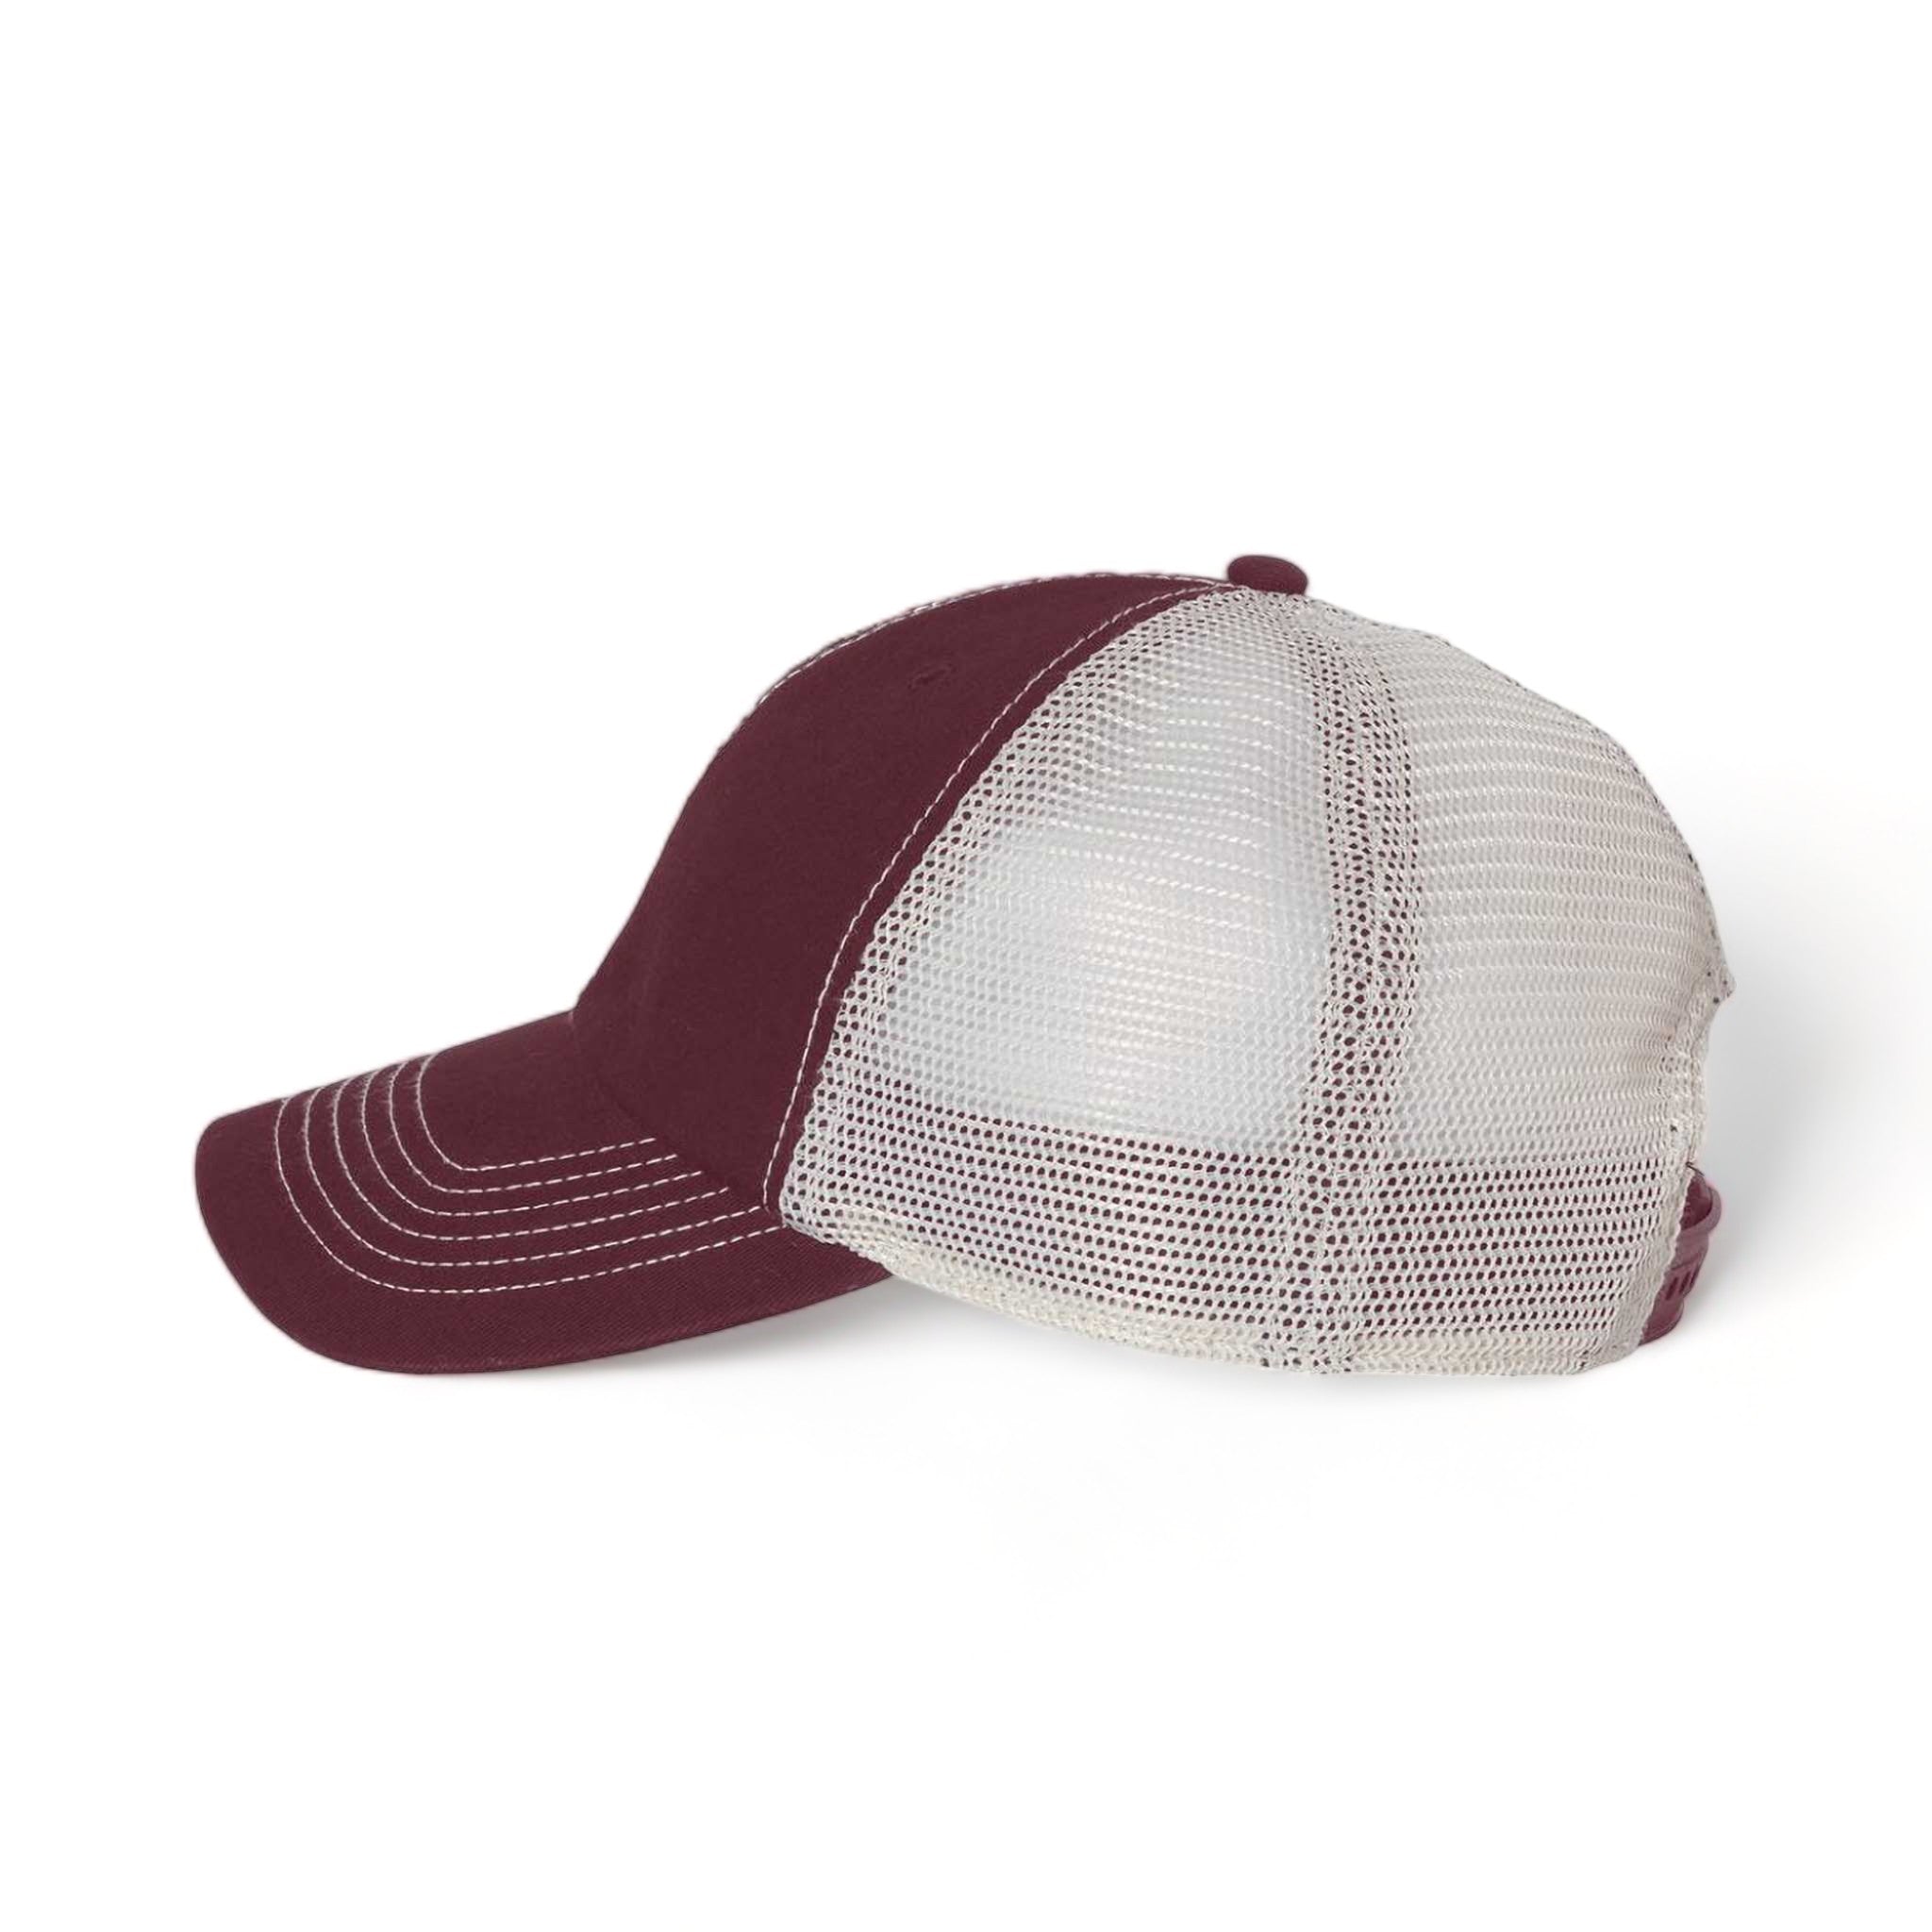 Side view of 47 Brand 4710 custom hat in dark maroon and stone